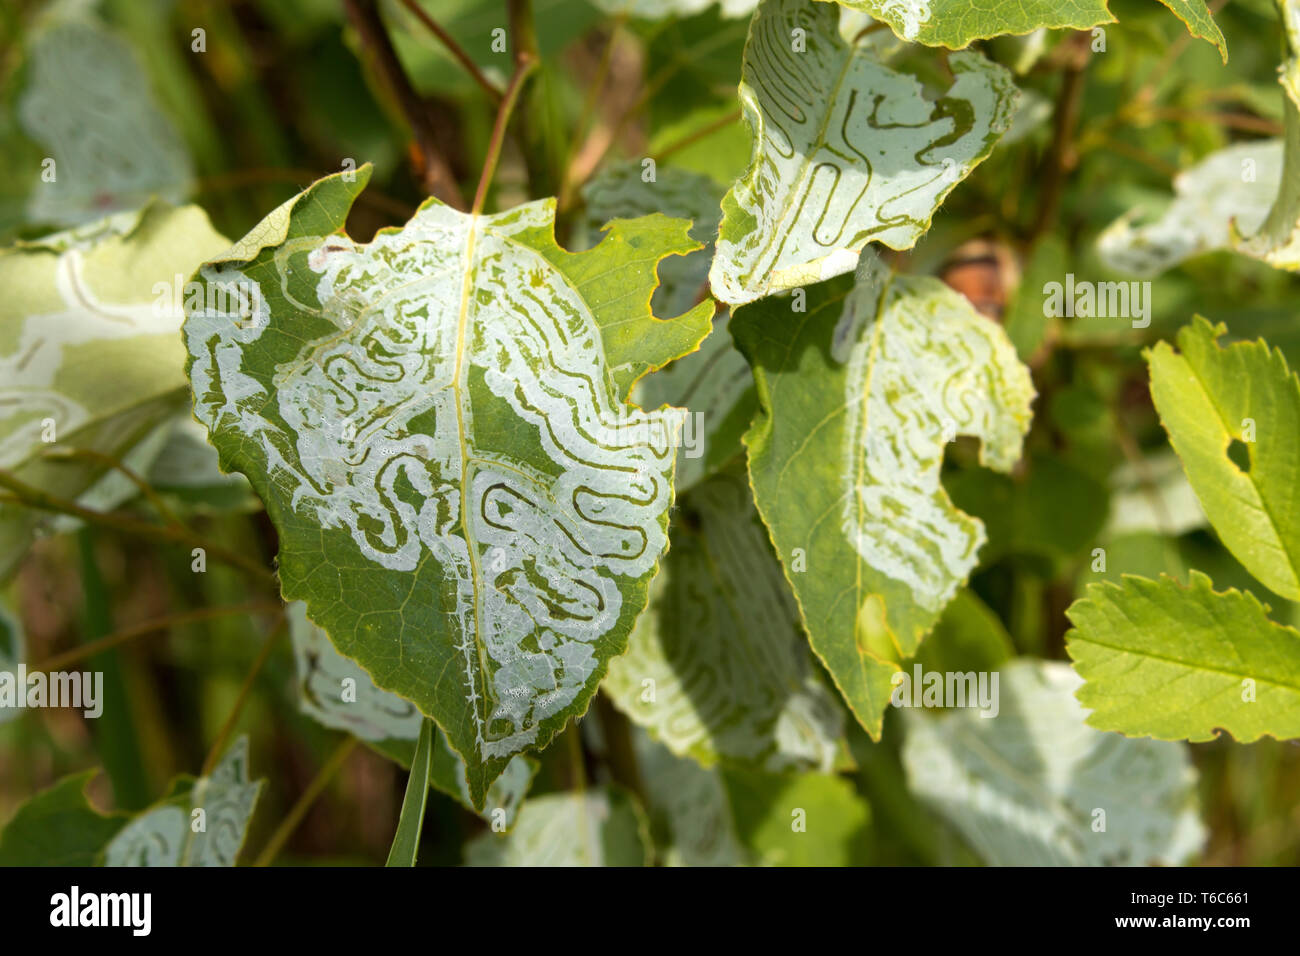 Leaf miner damage on green tree leaves. Feeding tunnel trail visible. Stock Photo